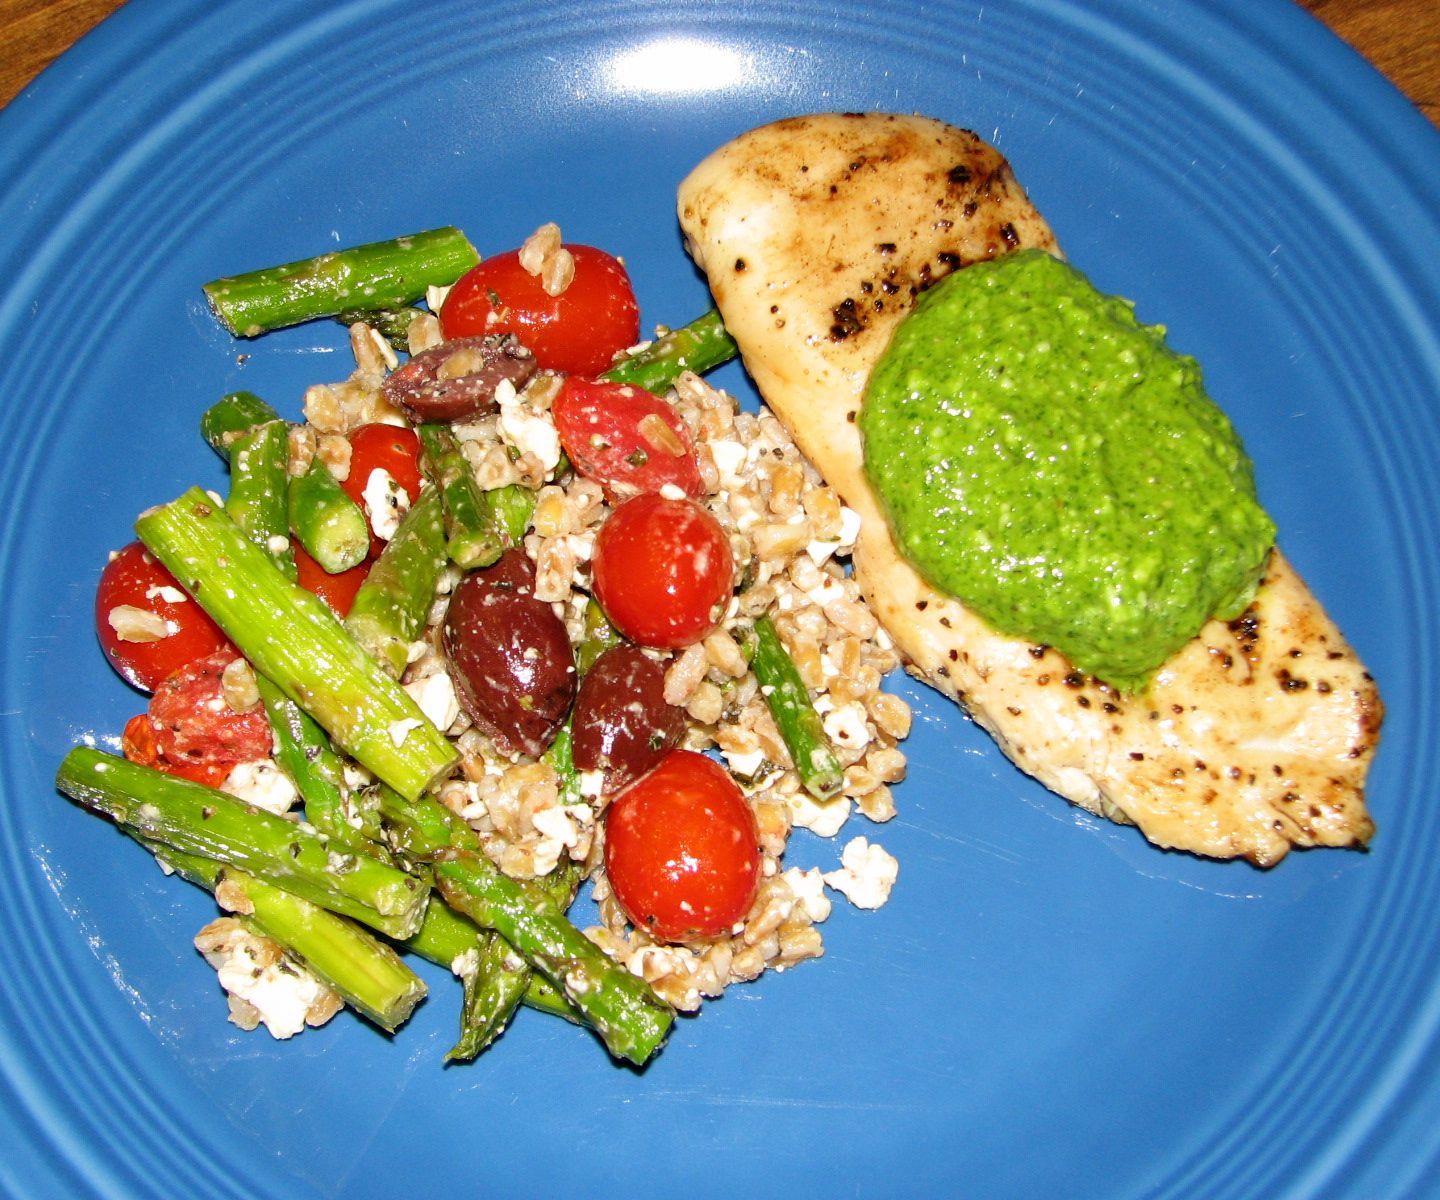 Shel's Kitchen: Grilled Chicken with Spinach and Pine Nut Pesto